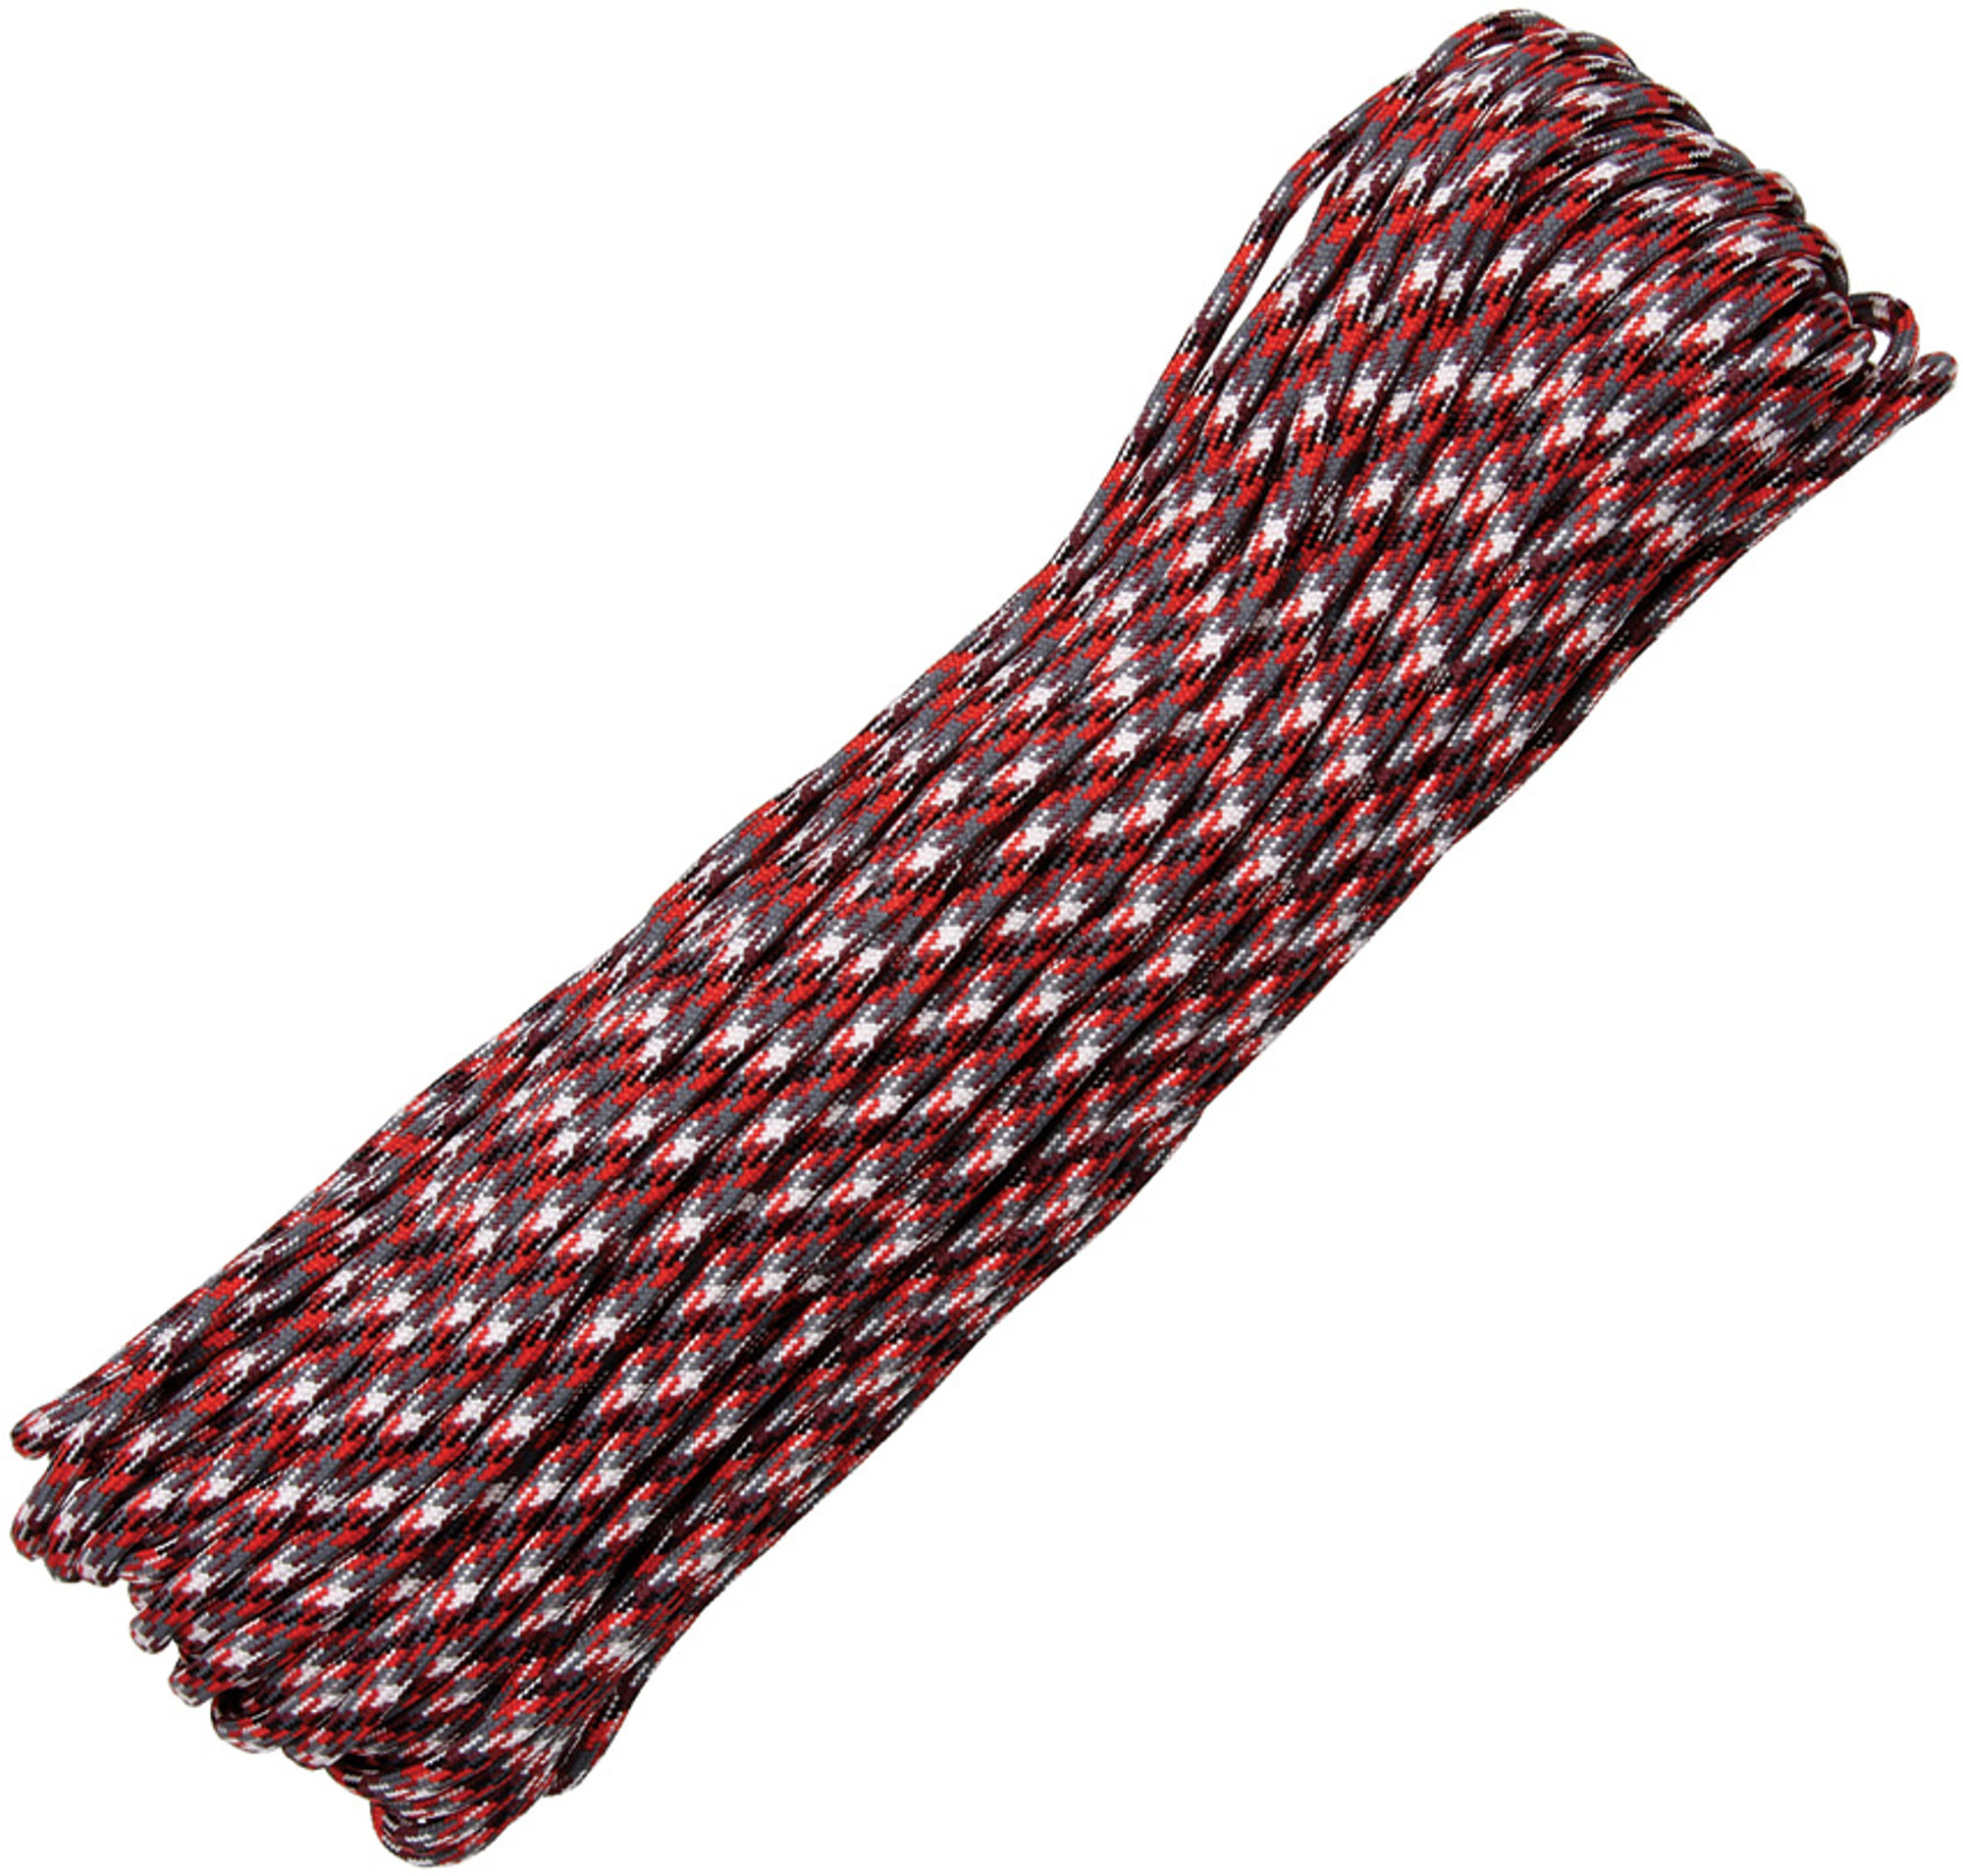 550 Paracord, 100Ft. - Red Camo